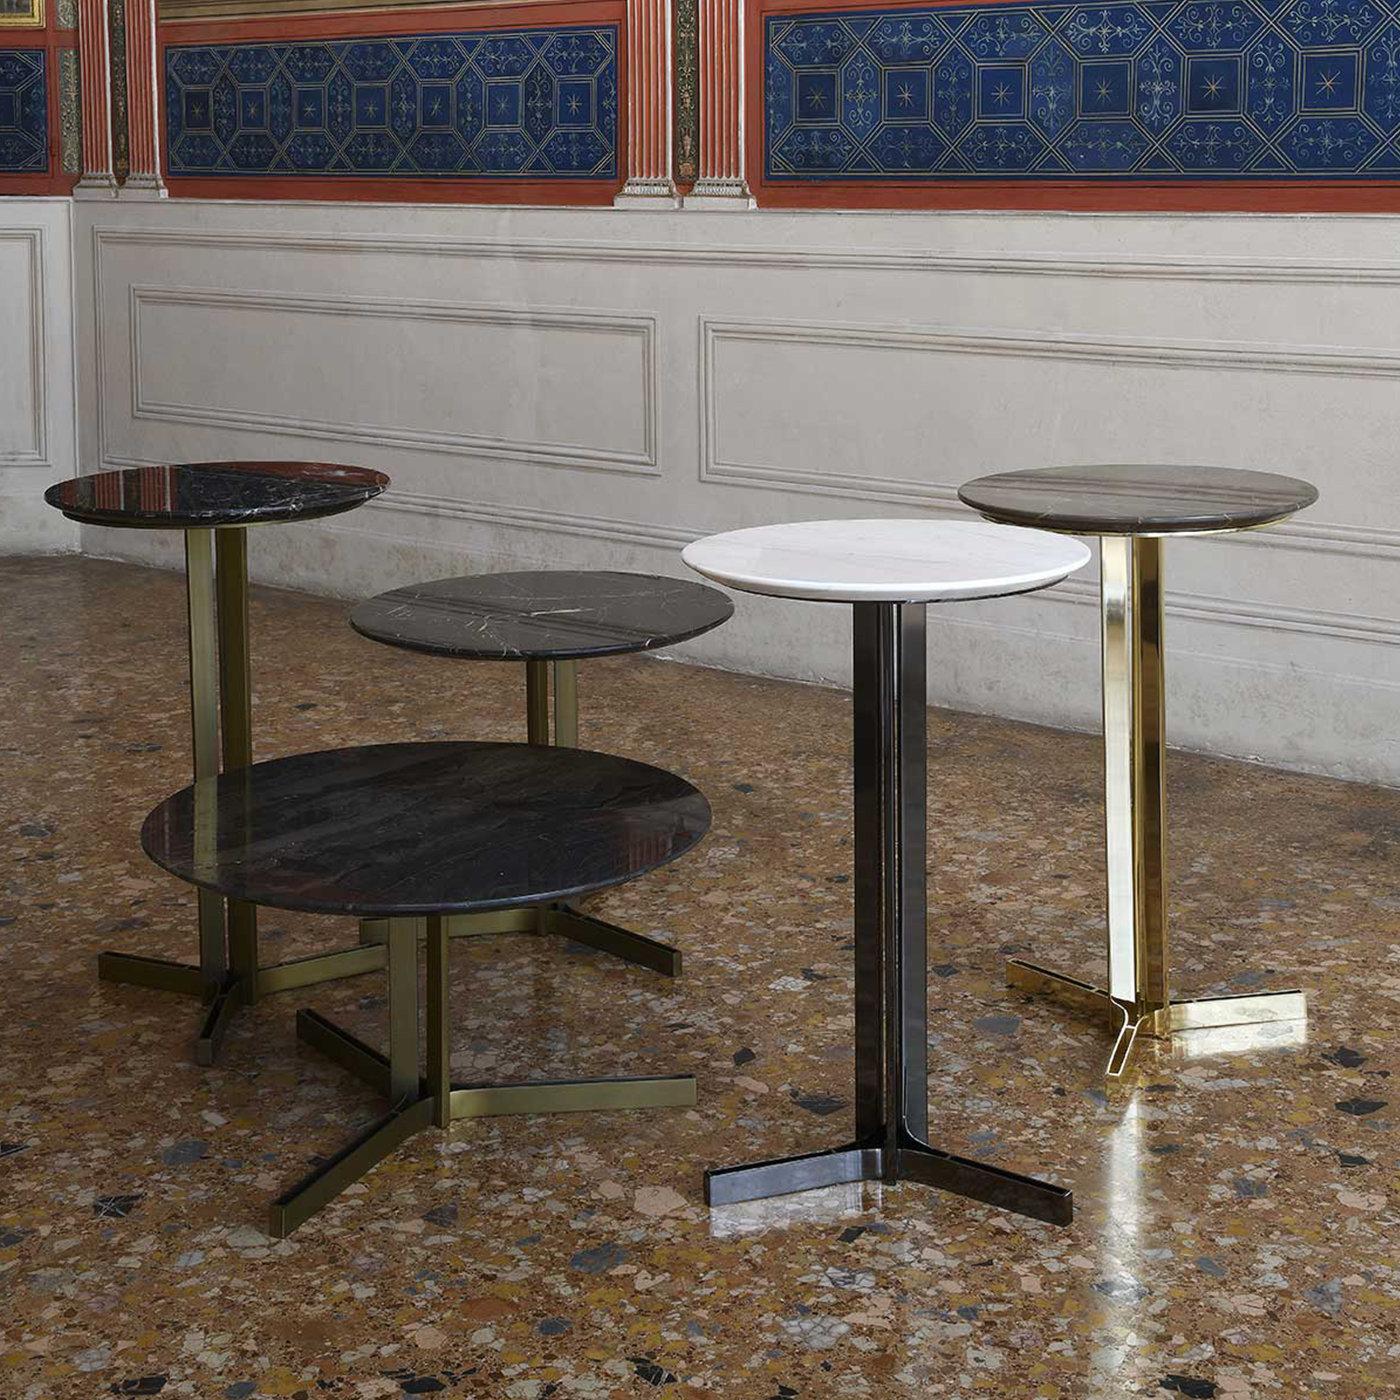 Subtle profiles characterize the restrained aesthetic of this elegant coffee table, inspired by the Titan Ceo that in Greek mythology symbolized wisdom. The metal base, varnished to achieve a burnished brass effect, comprises three elements